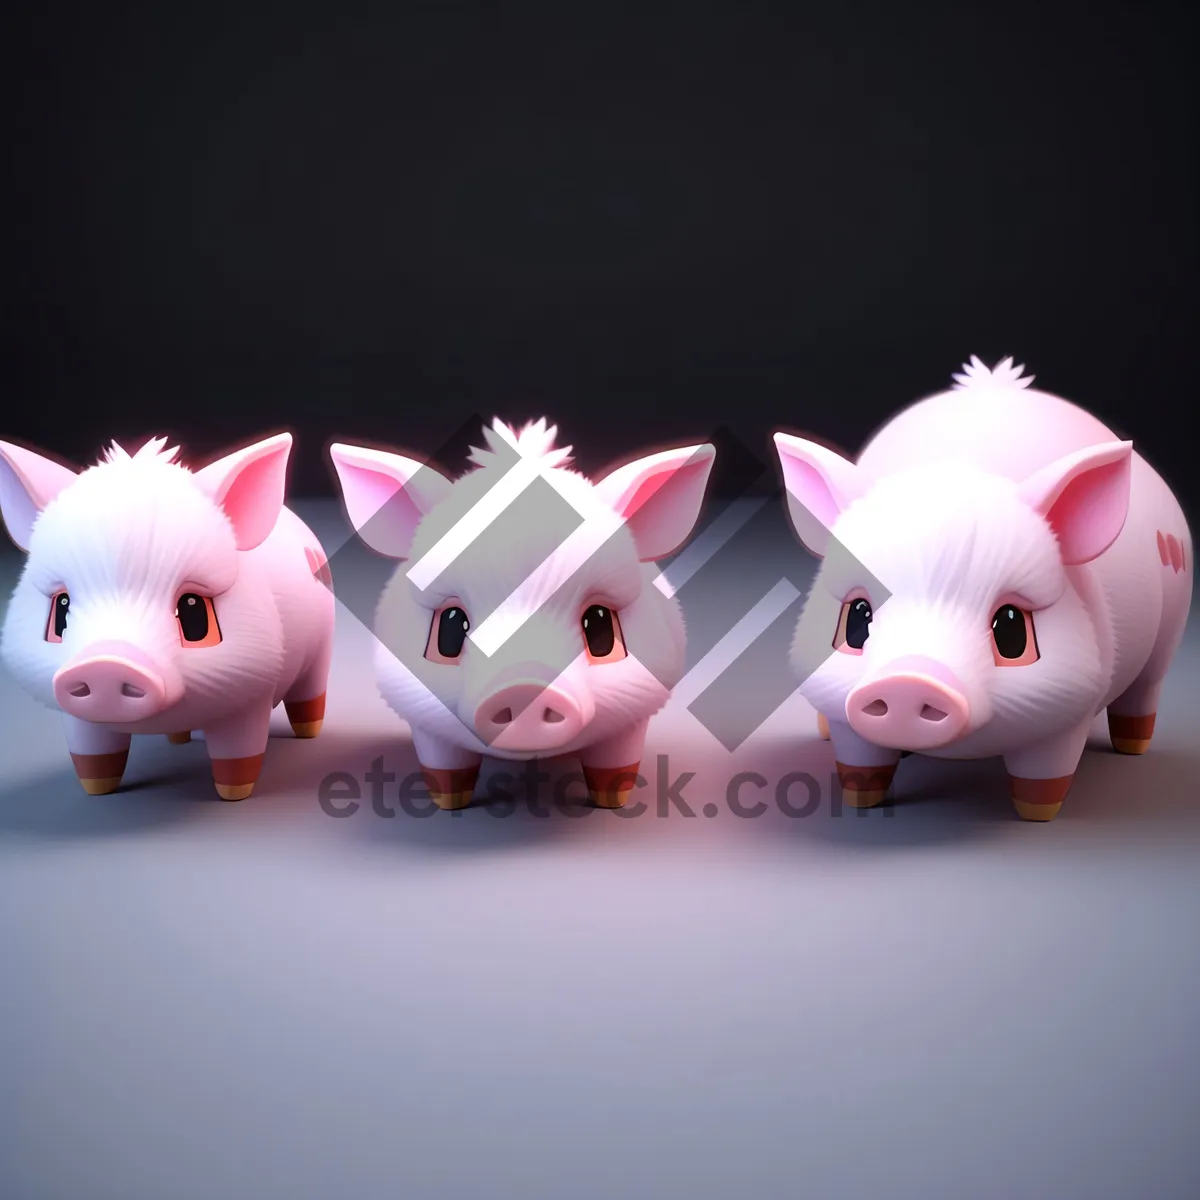 Picture of Pink Piggy Bank - Saving Money for Financial Security